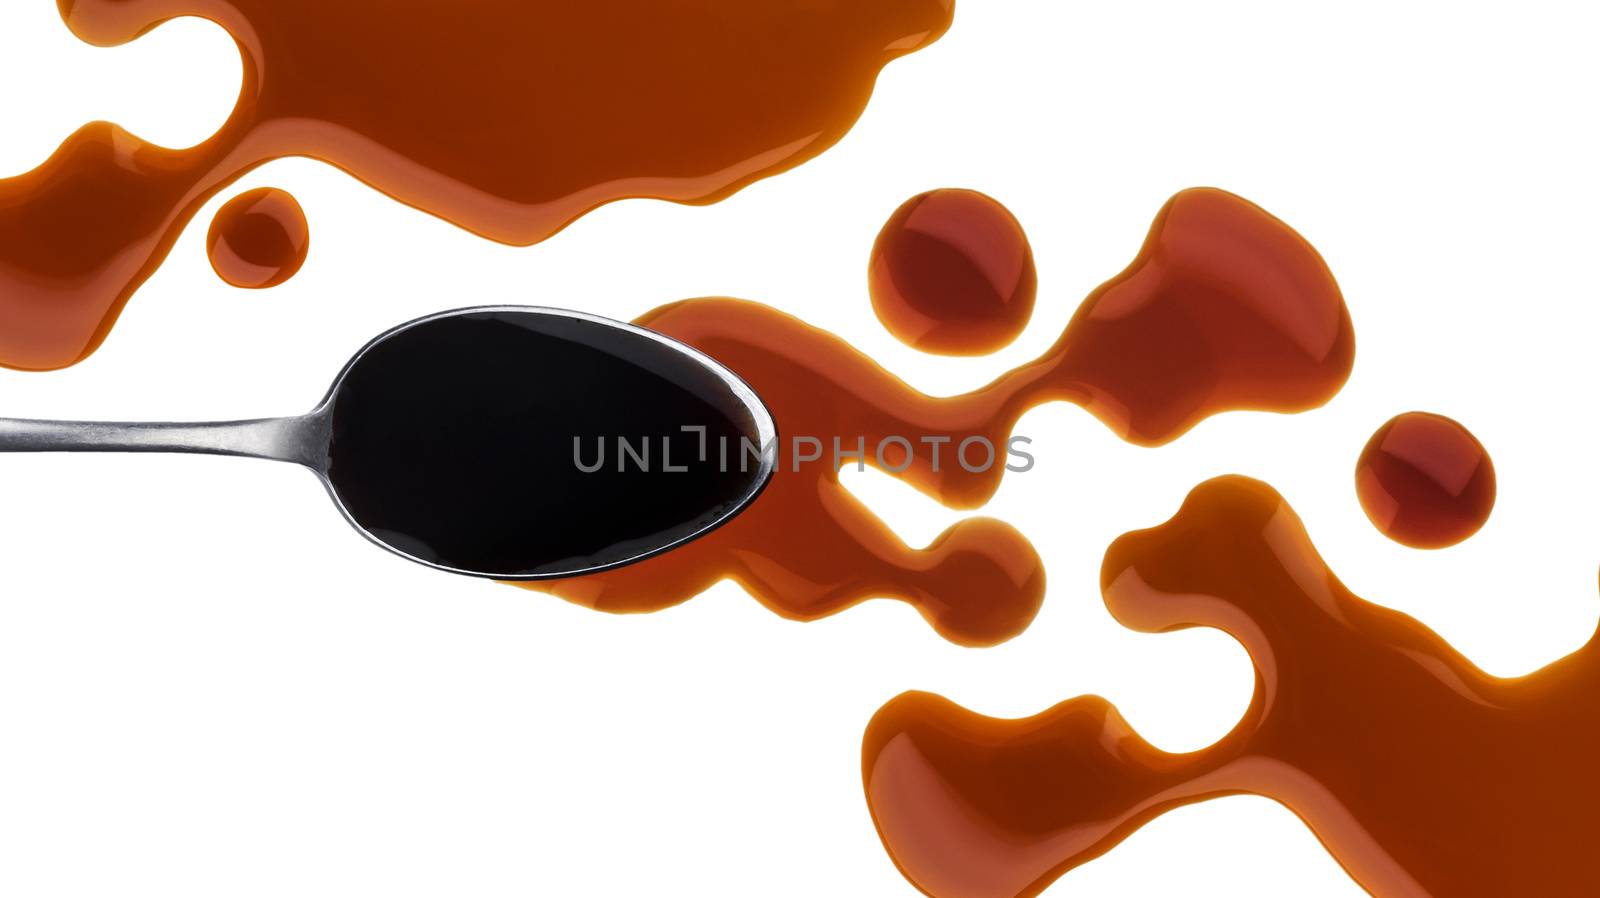 Soy sauce. Splashes and spilled soy sauce with spoon isolated on white background with clipping path. Top view